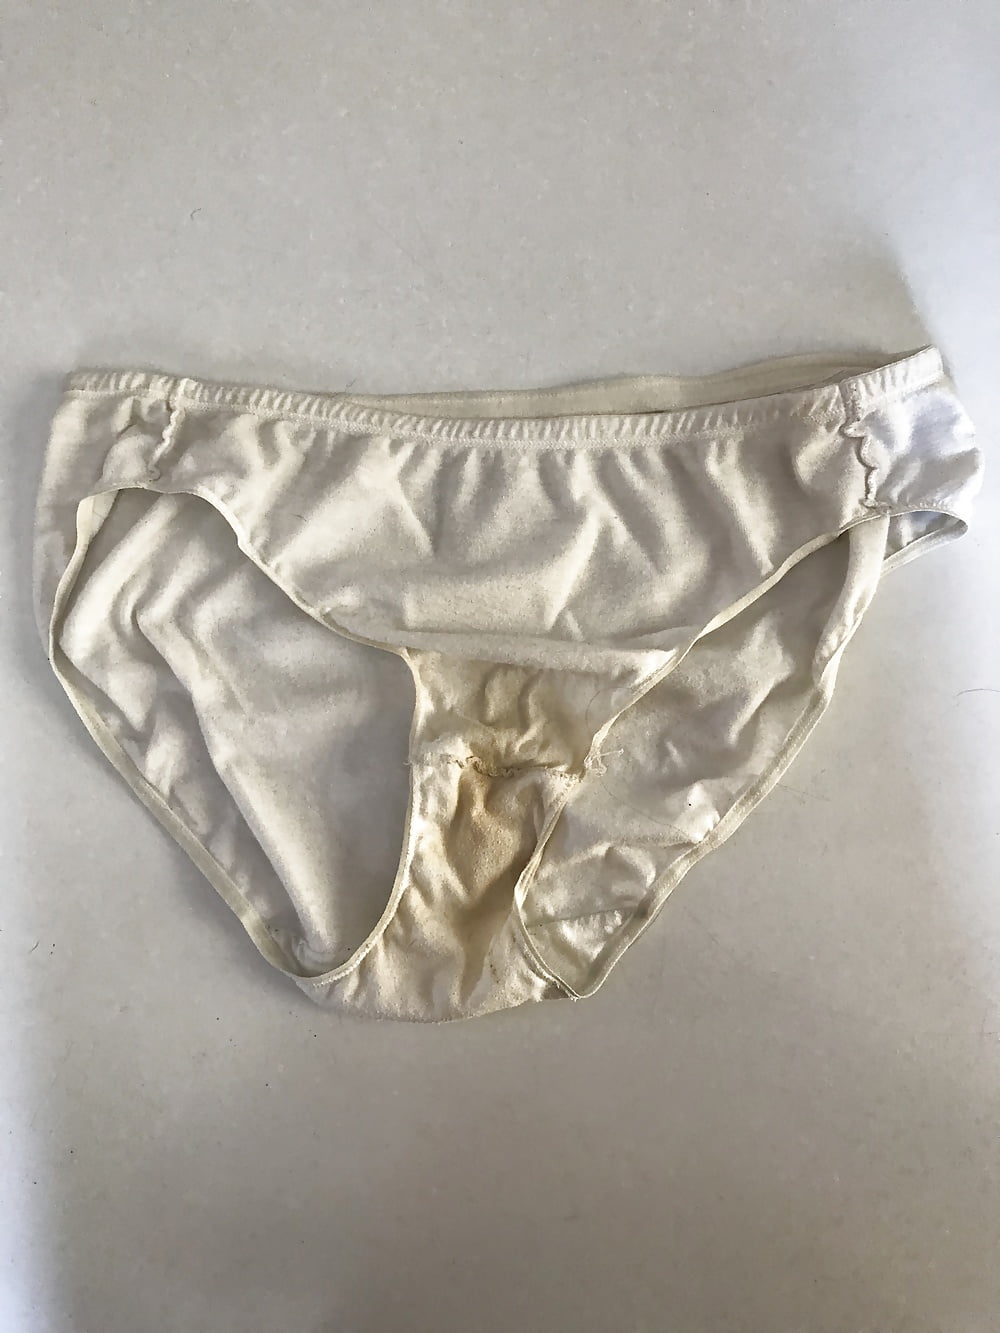 Very Dirty Panties For Sale 9 Pics